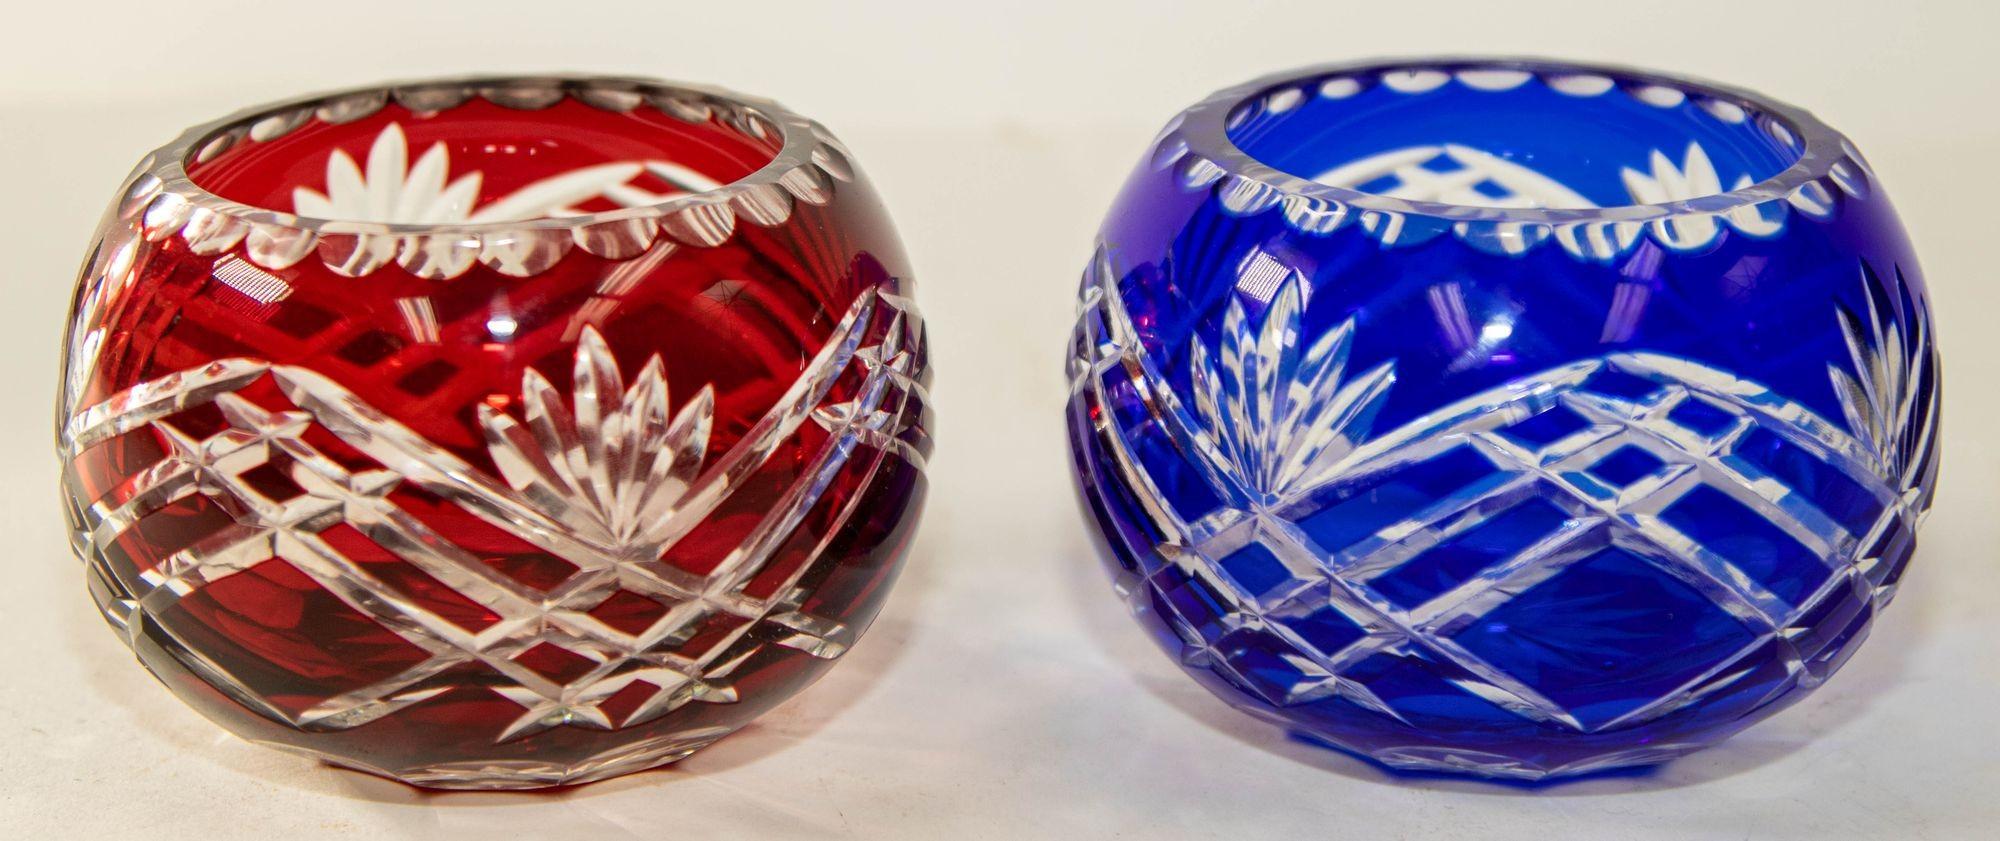 European Vintage Bohemian Crystal Votive Candle Holder in Cobalt Blue and Ruby Red